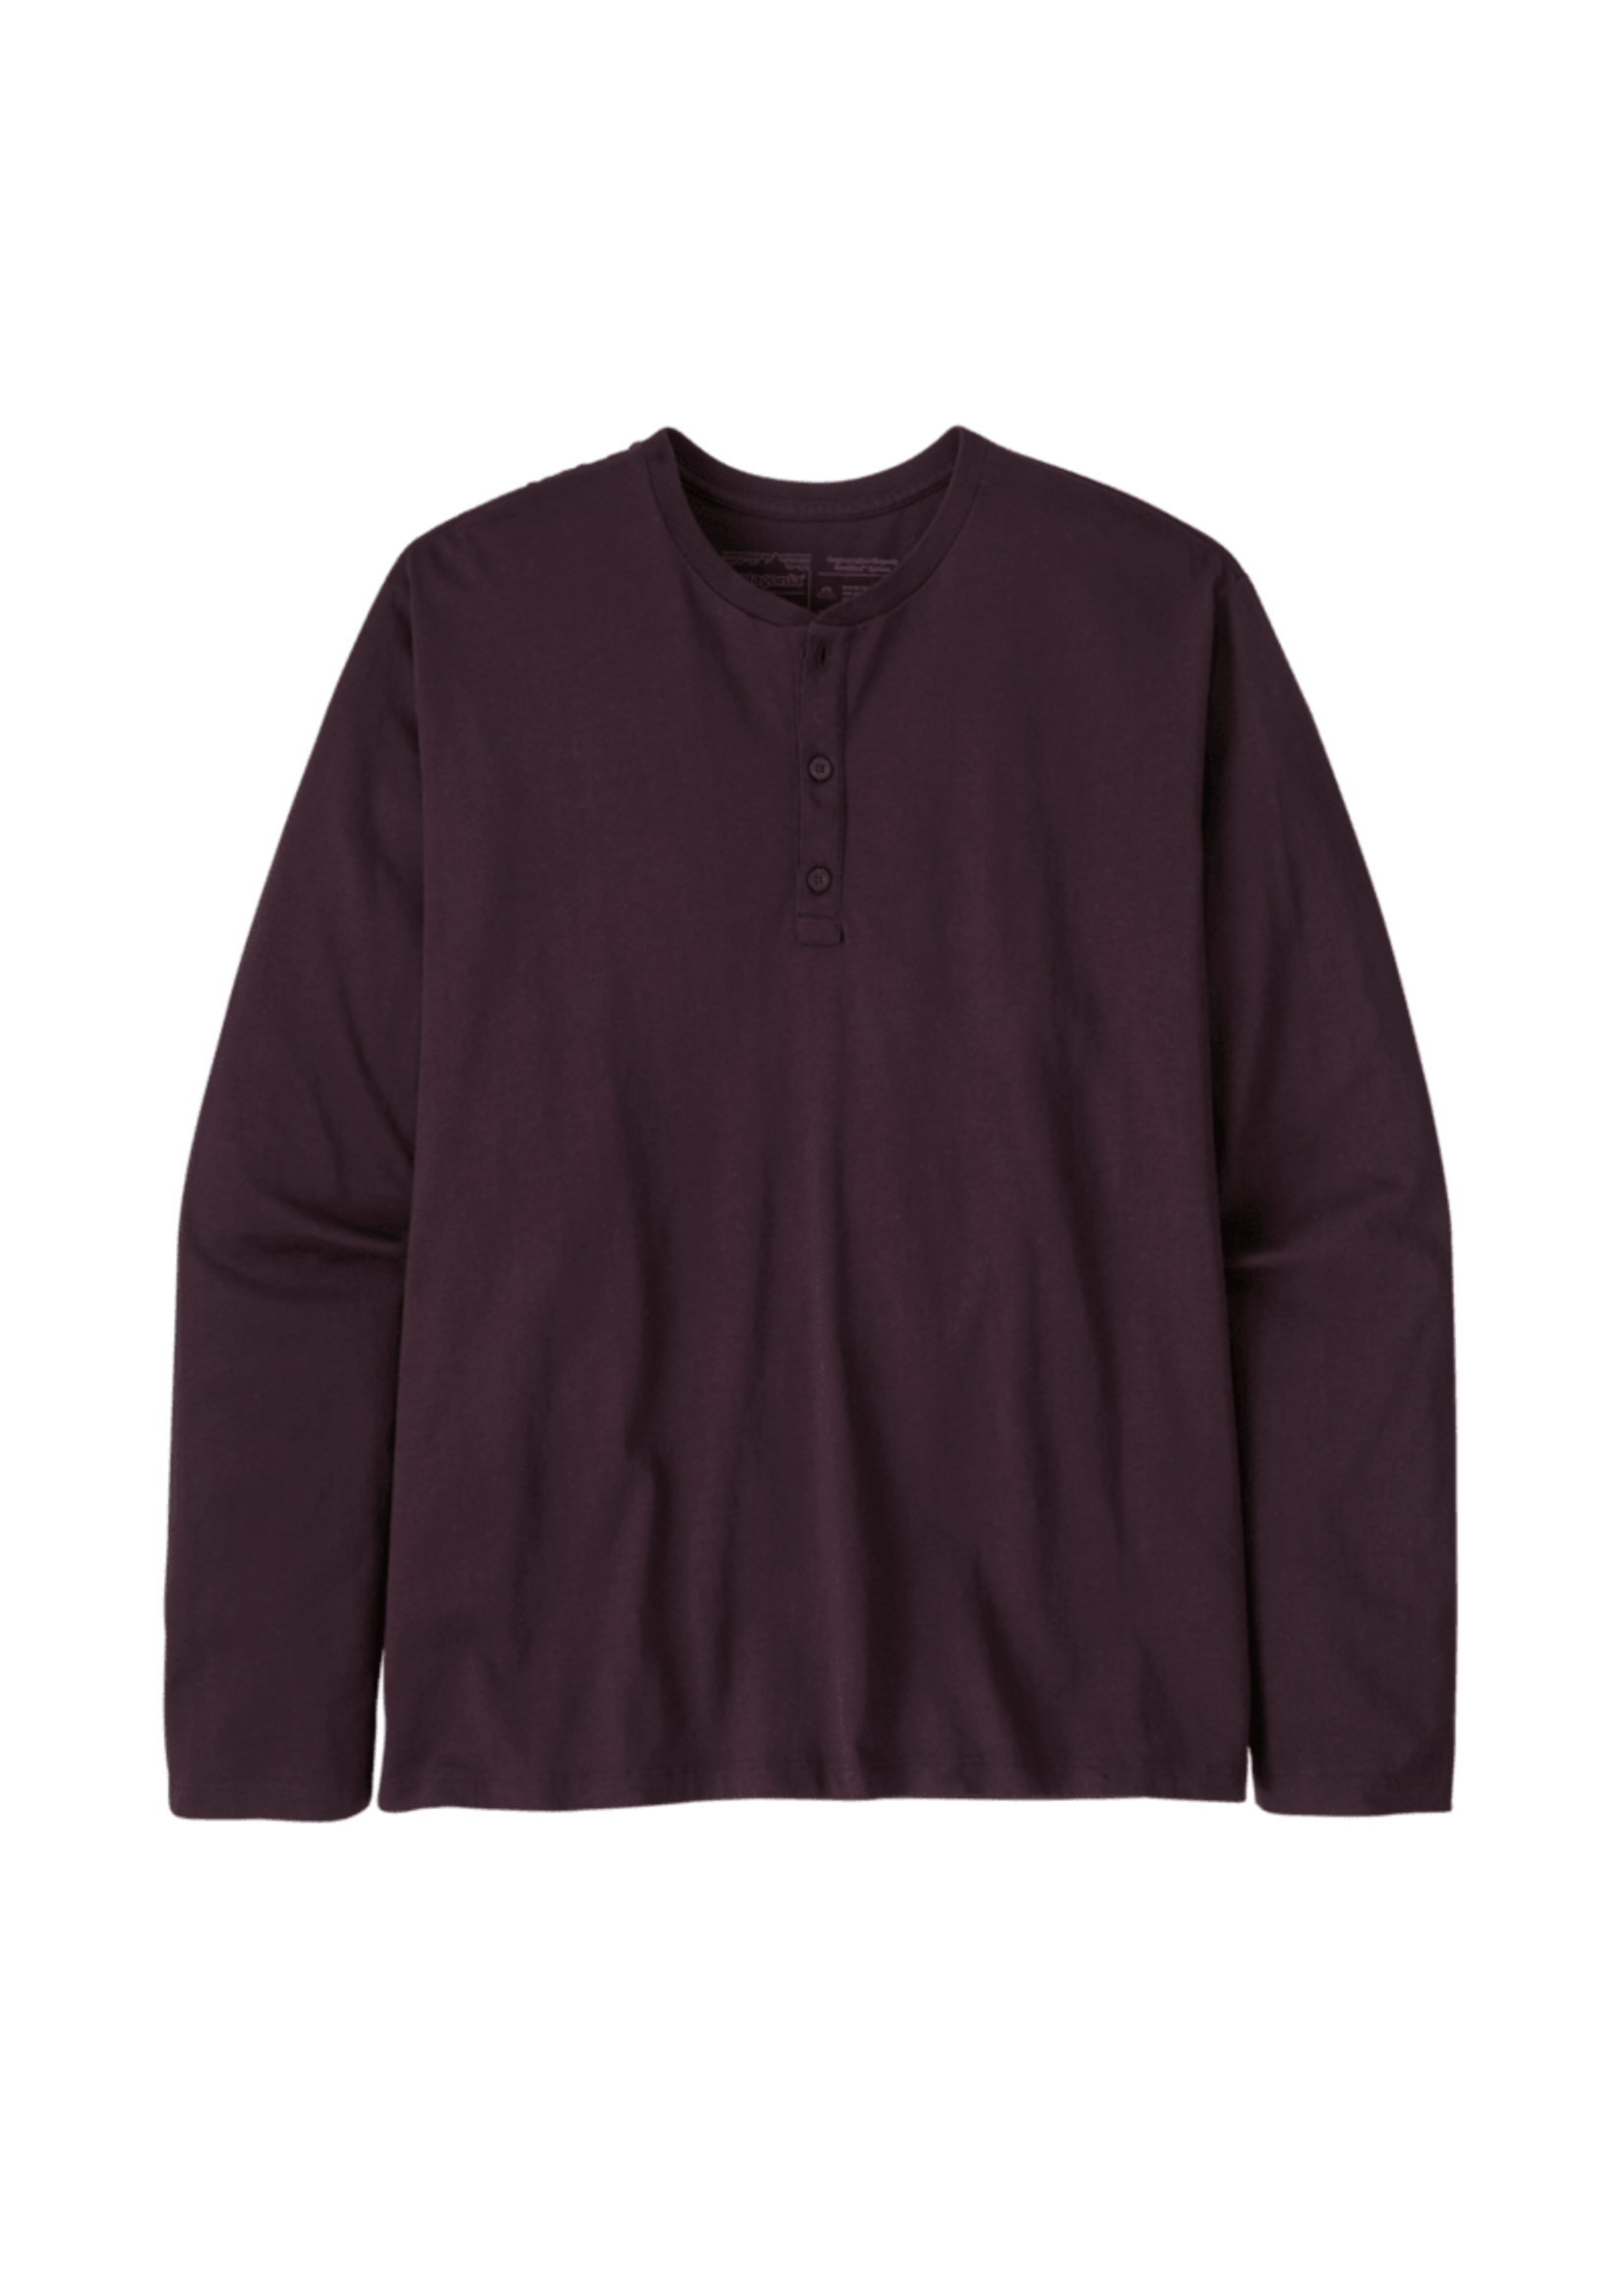 Patagonia Men's L/S Daily Henley - Obsidian Plum